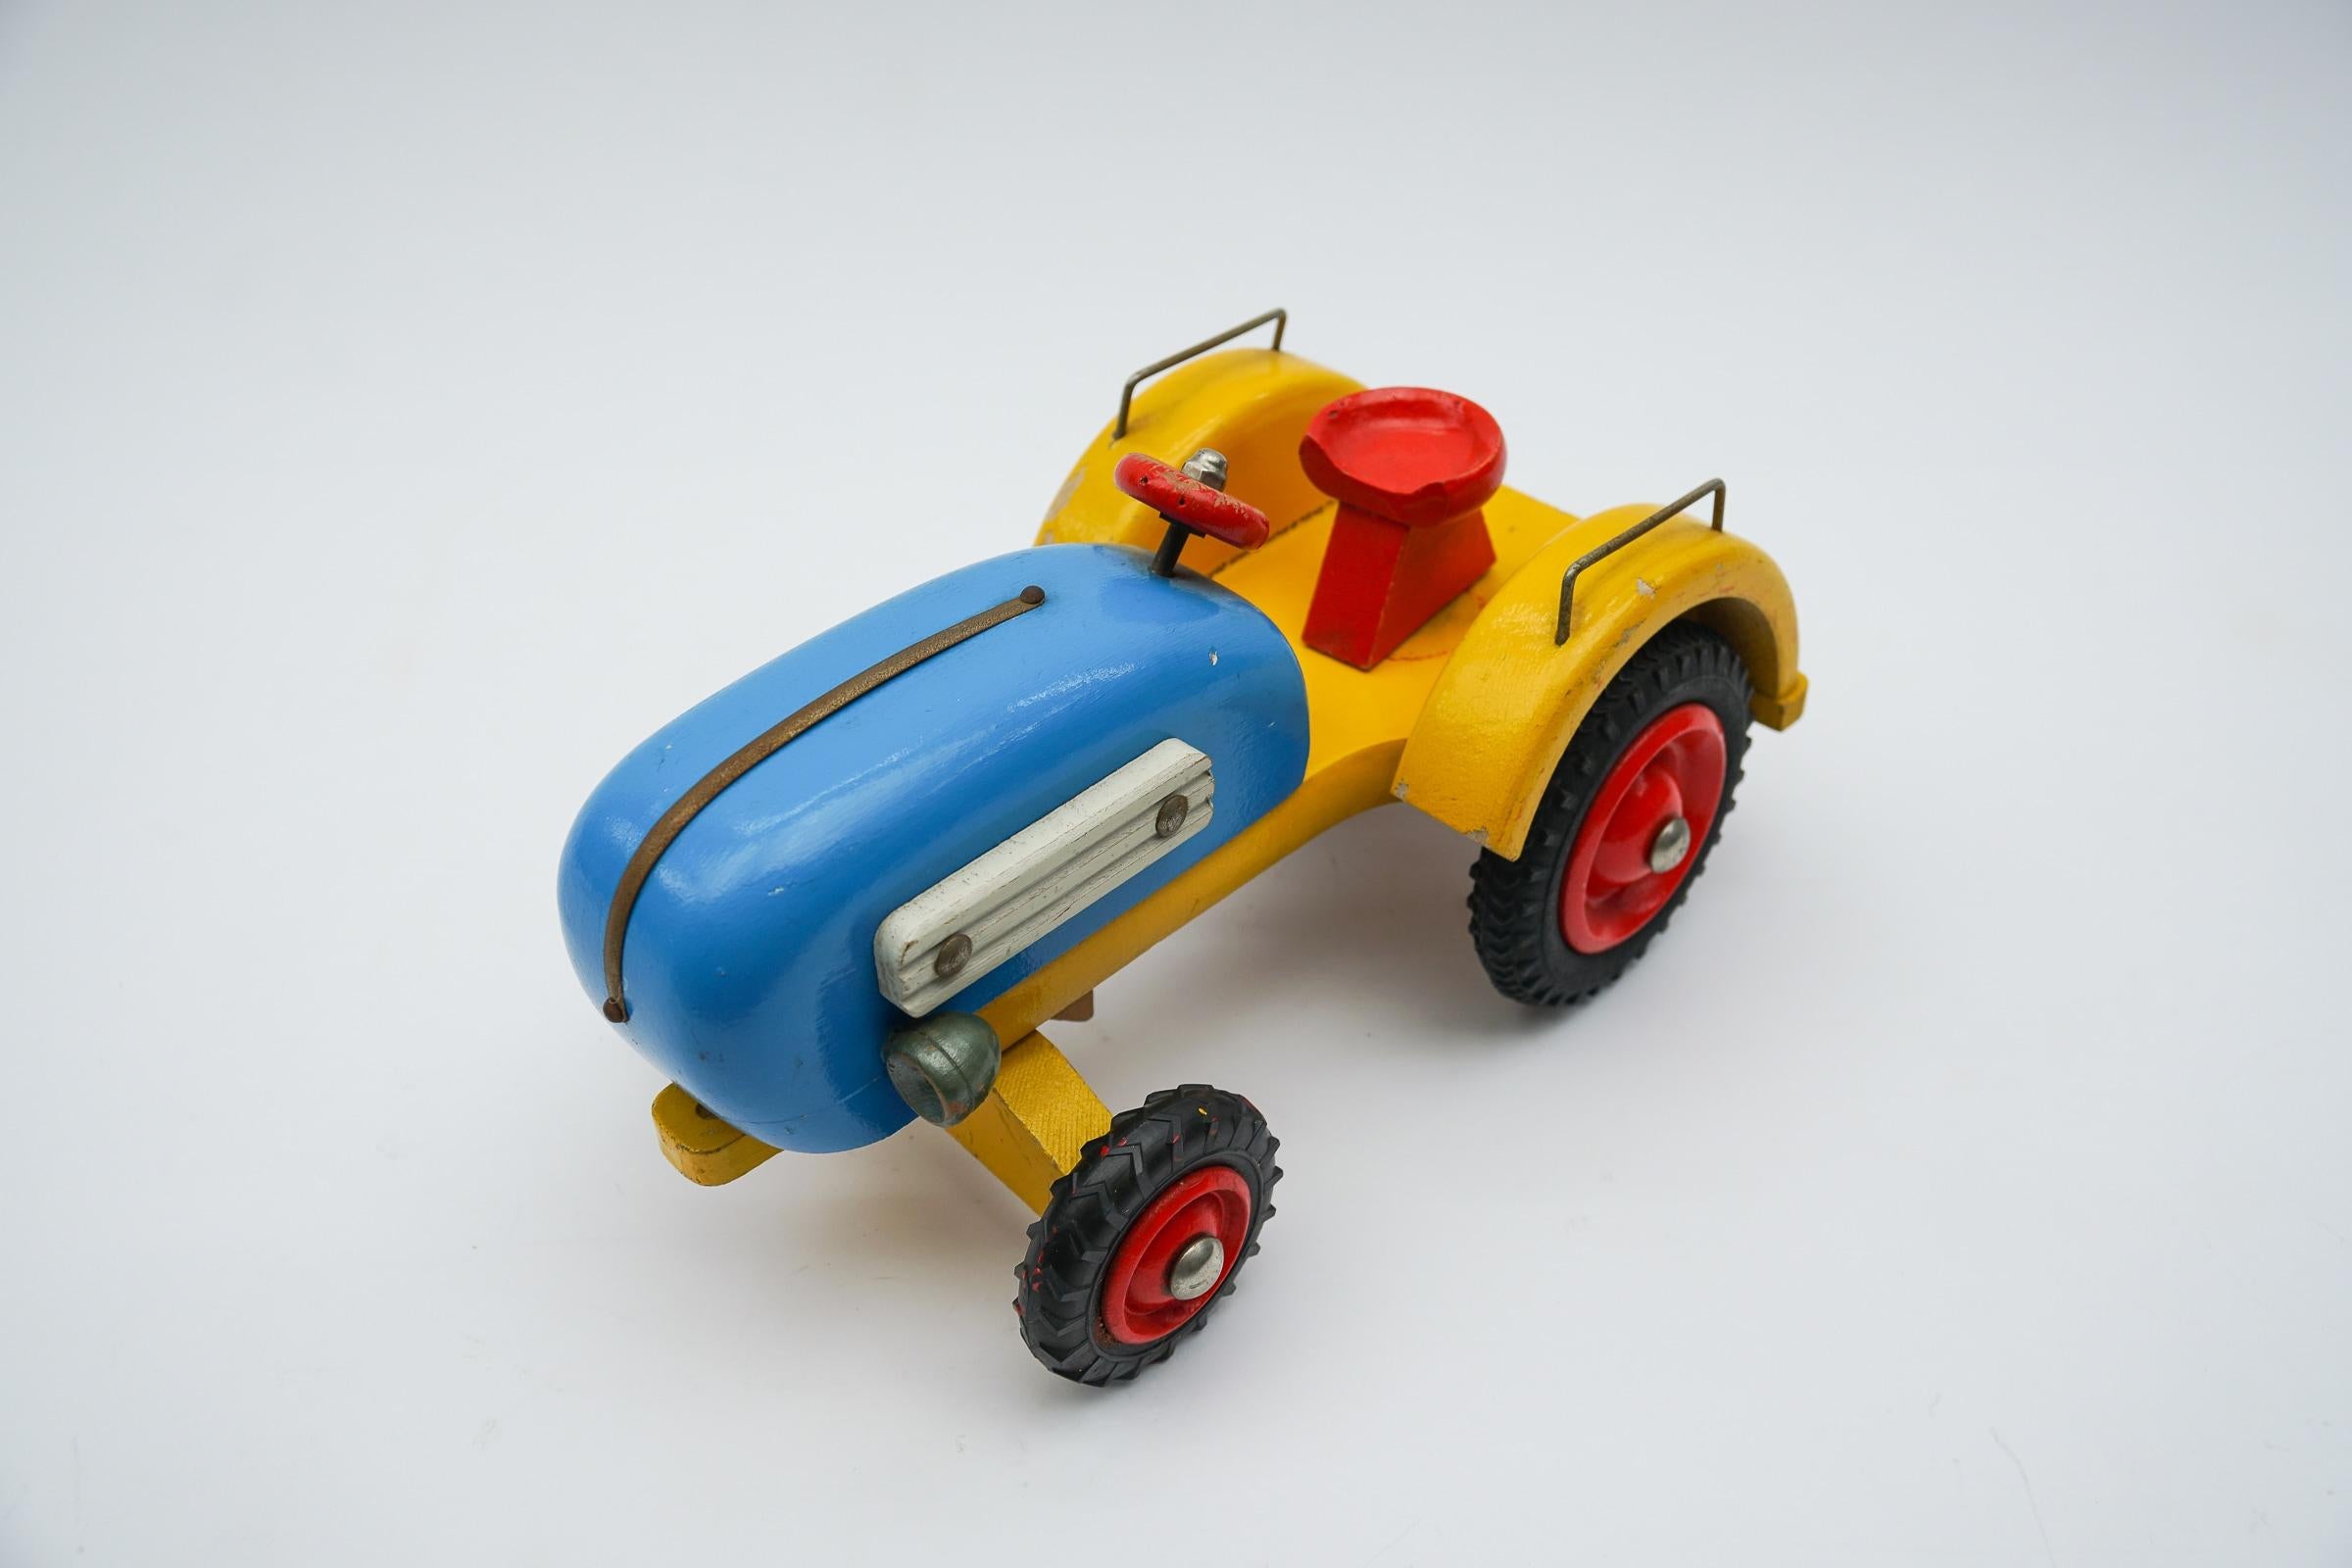 Old painted Waldorf school wooden toy tractor with movable front axle from Germany. 1950s / 1960s.